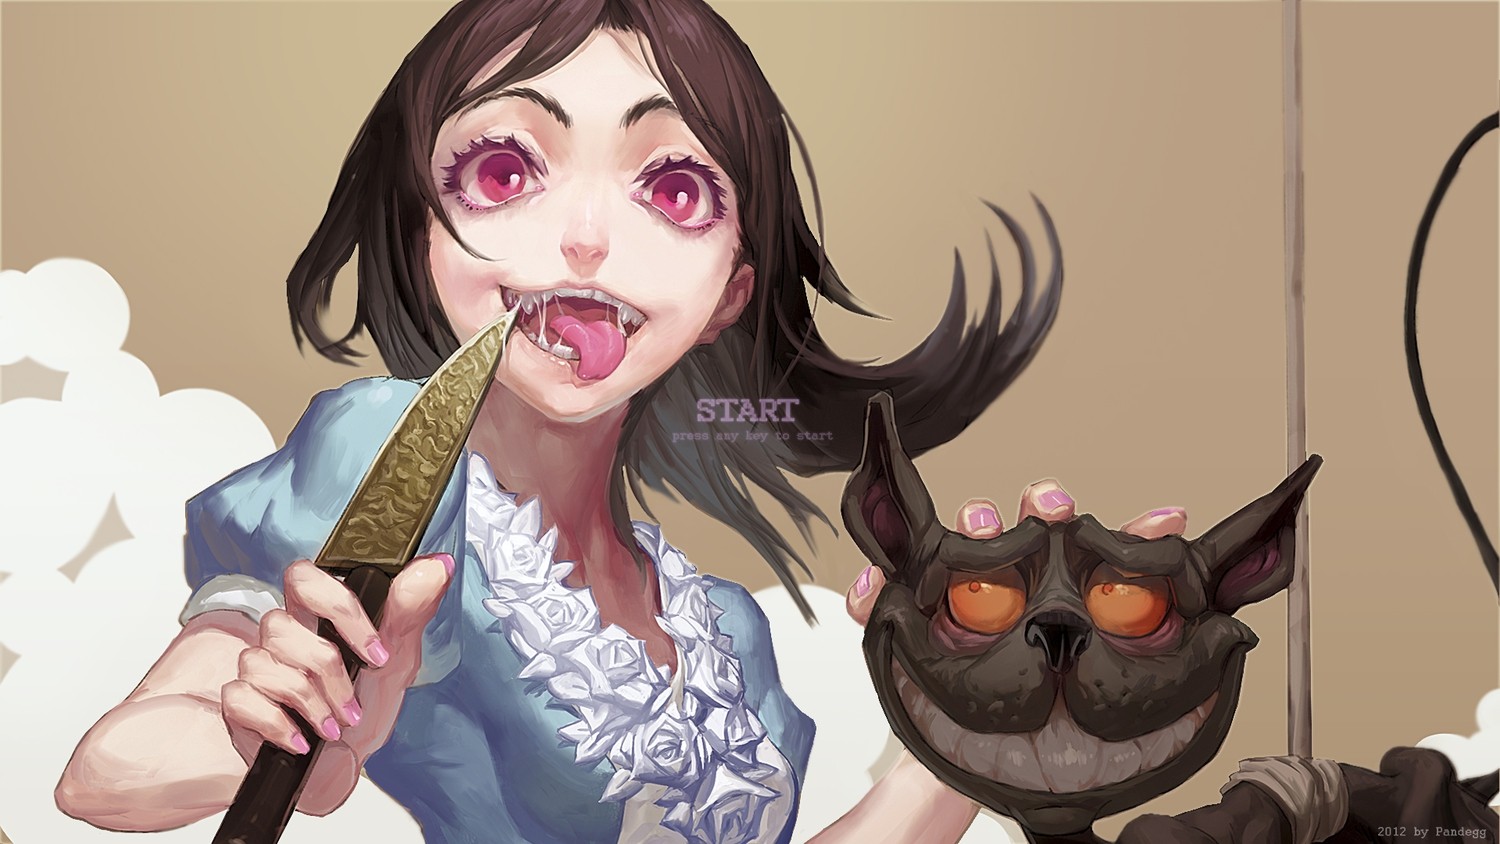 Anime 1500x844 Alice: Madness Returns video games knife tongues tongue out video game girls brunette Pixiv video game art fantasy art fantasy girl